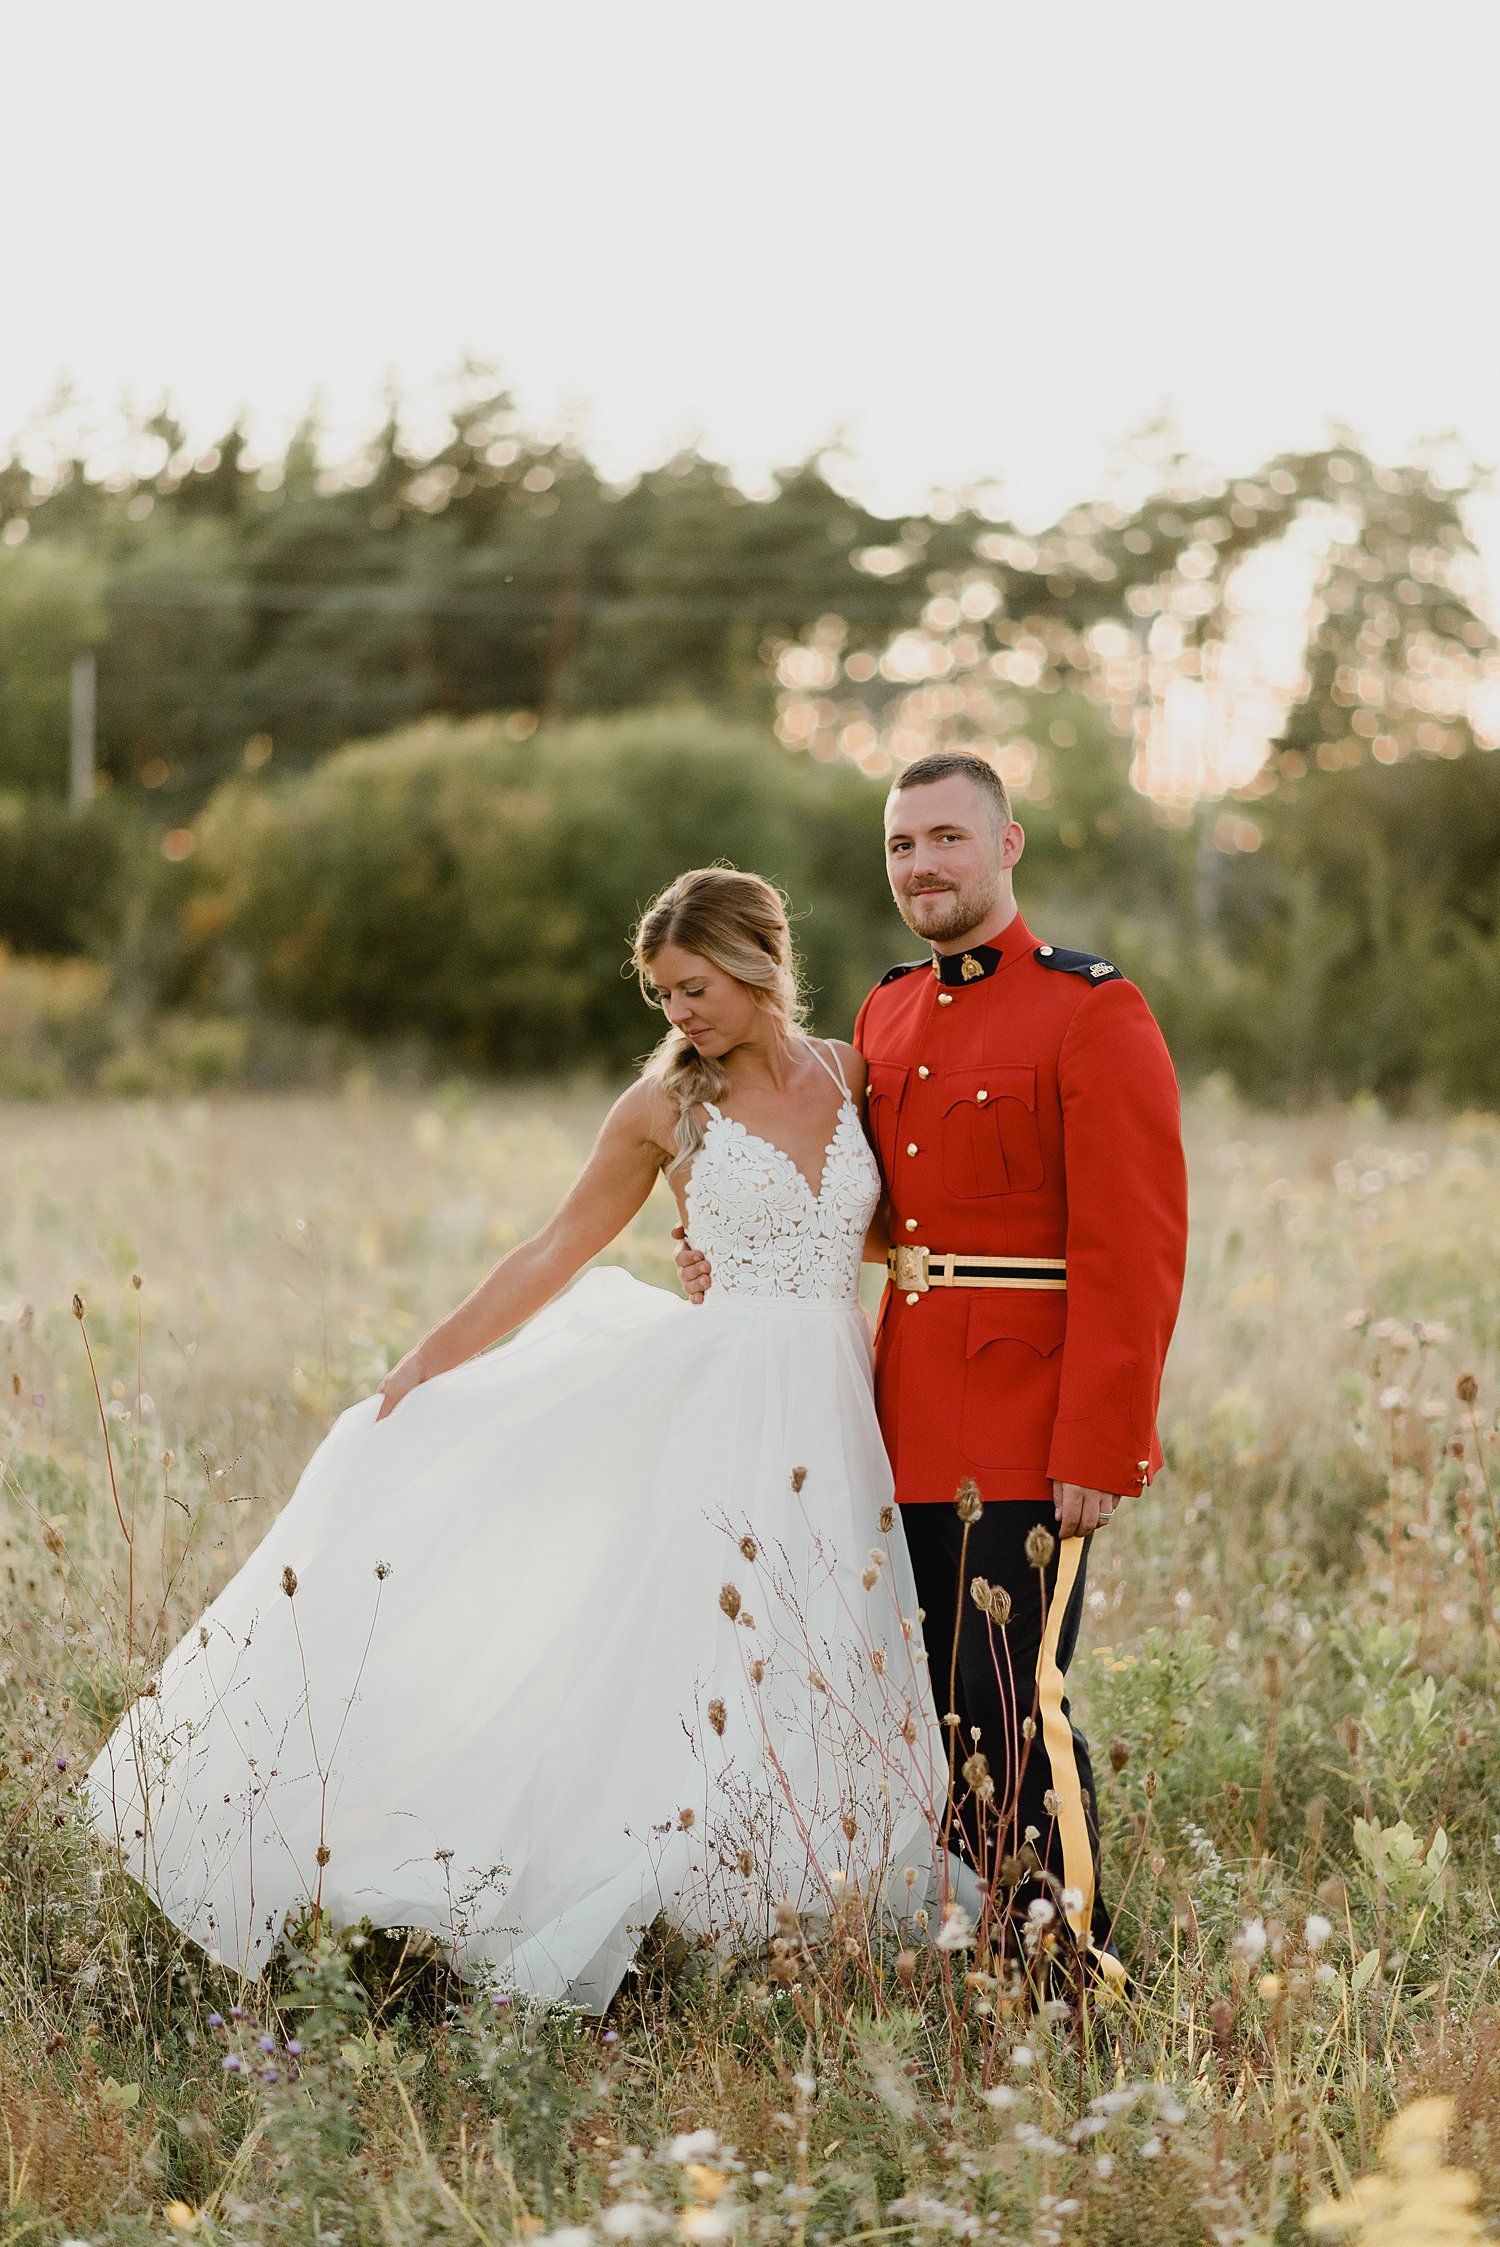 A Royal Canadian Mountie's Intimate Summer Wedding in Prince Edward County | Prince Edward County Wedding Photographer | Holly McMurter Photographs_0089.jpg